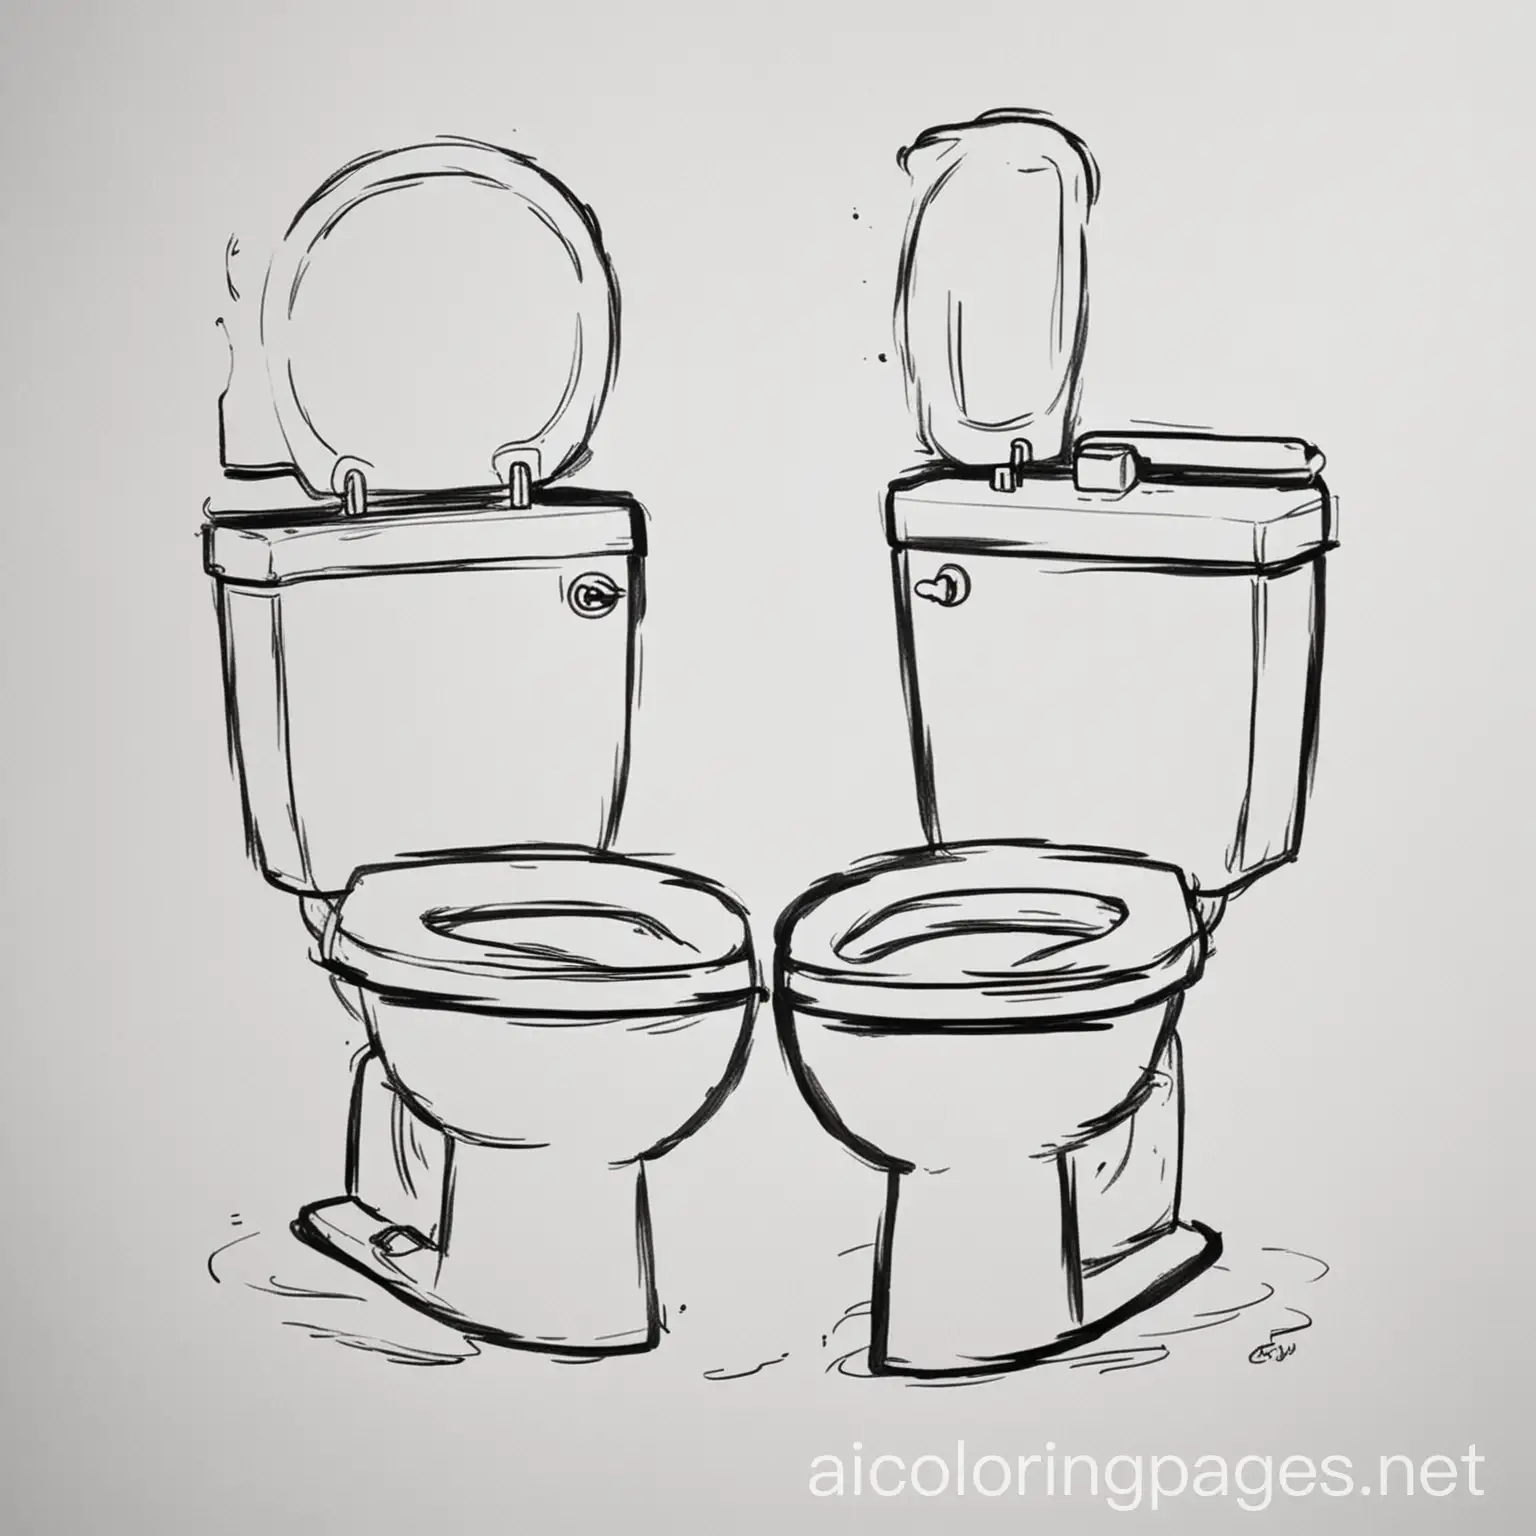 Toilet-vs-Toilet-Black-and-White-Coloring-Page-for-Kids